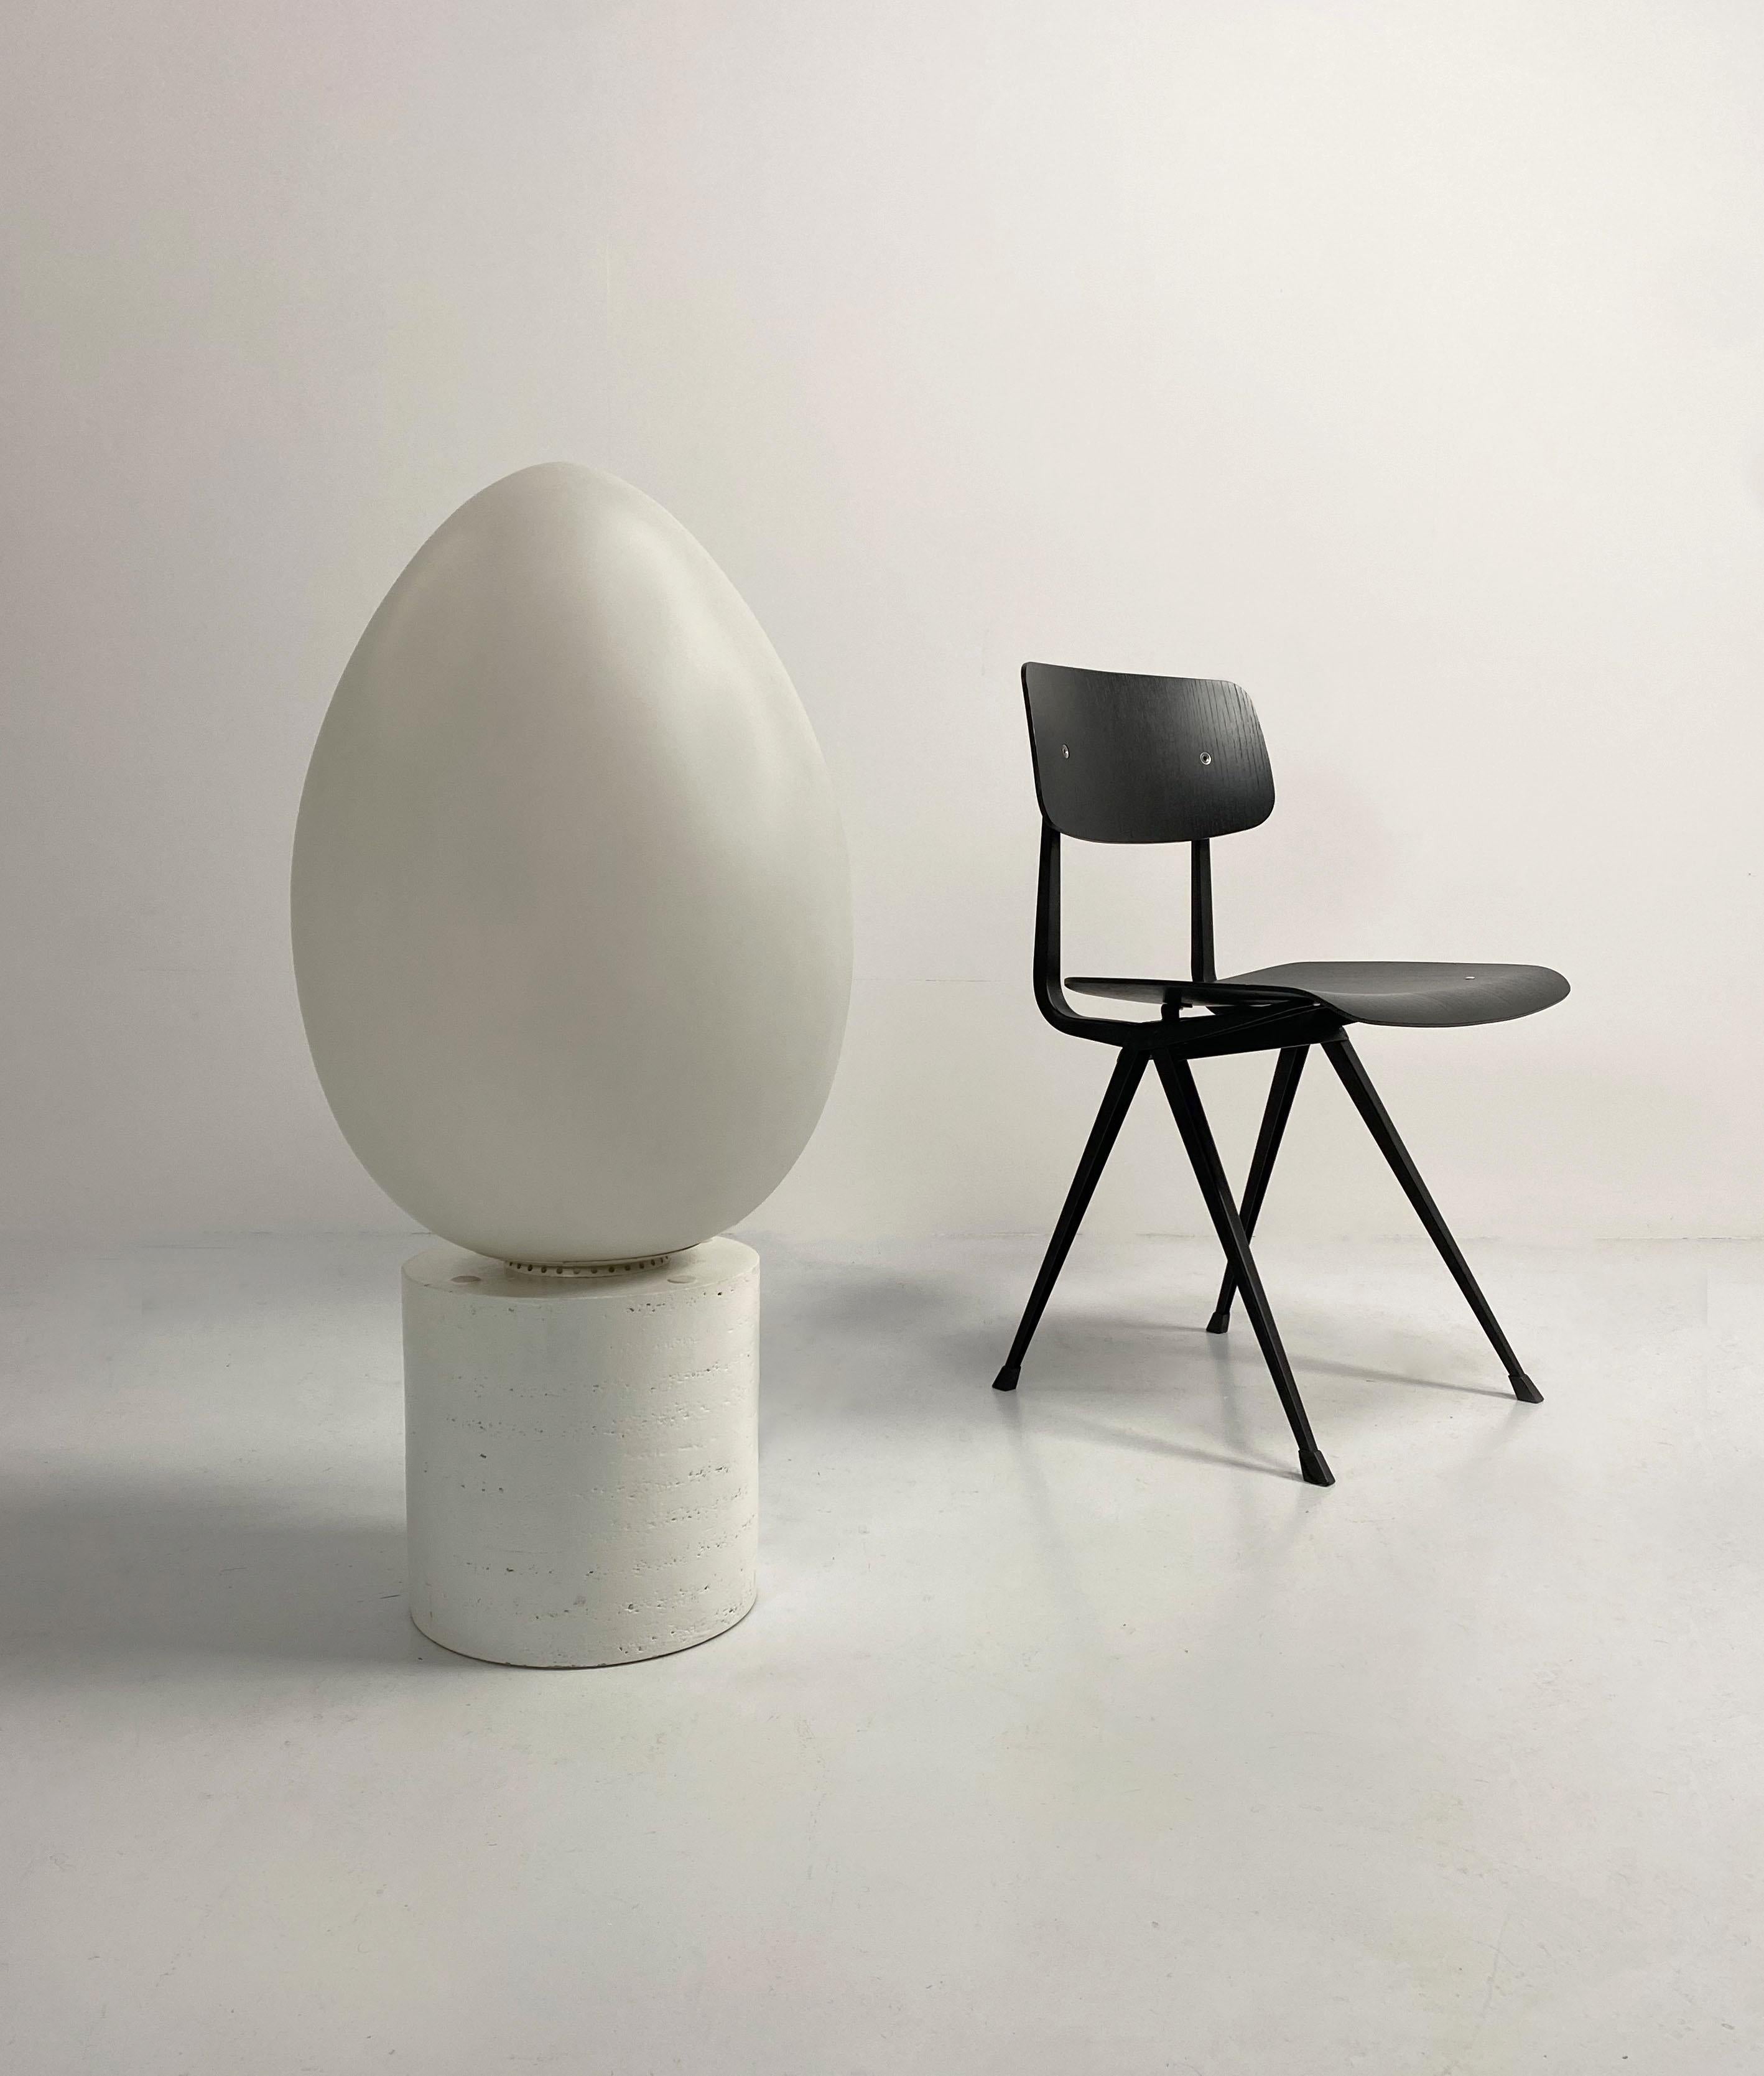 First edition Uovo lamp designed by Ben Swildens and produced by Fontana Arte in the 1970's. This is the largest model at 62 cm high. Composed of a satin opaline glass egg on a white aluminium base.